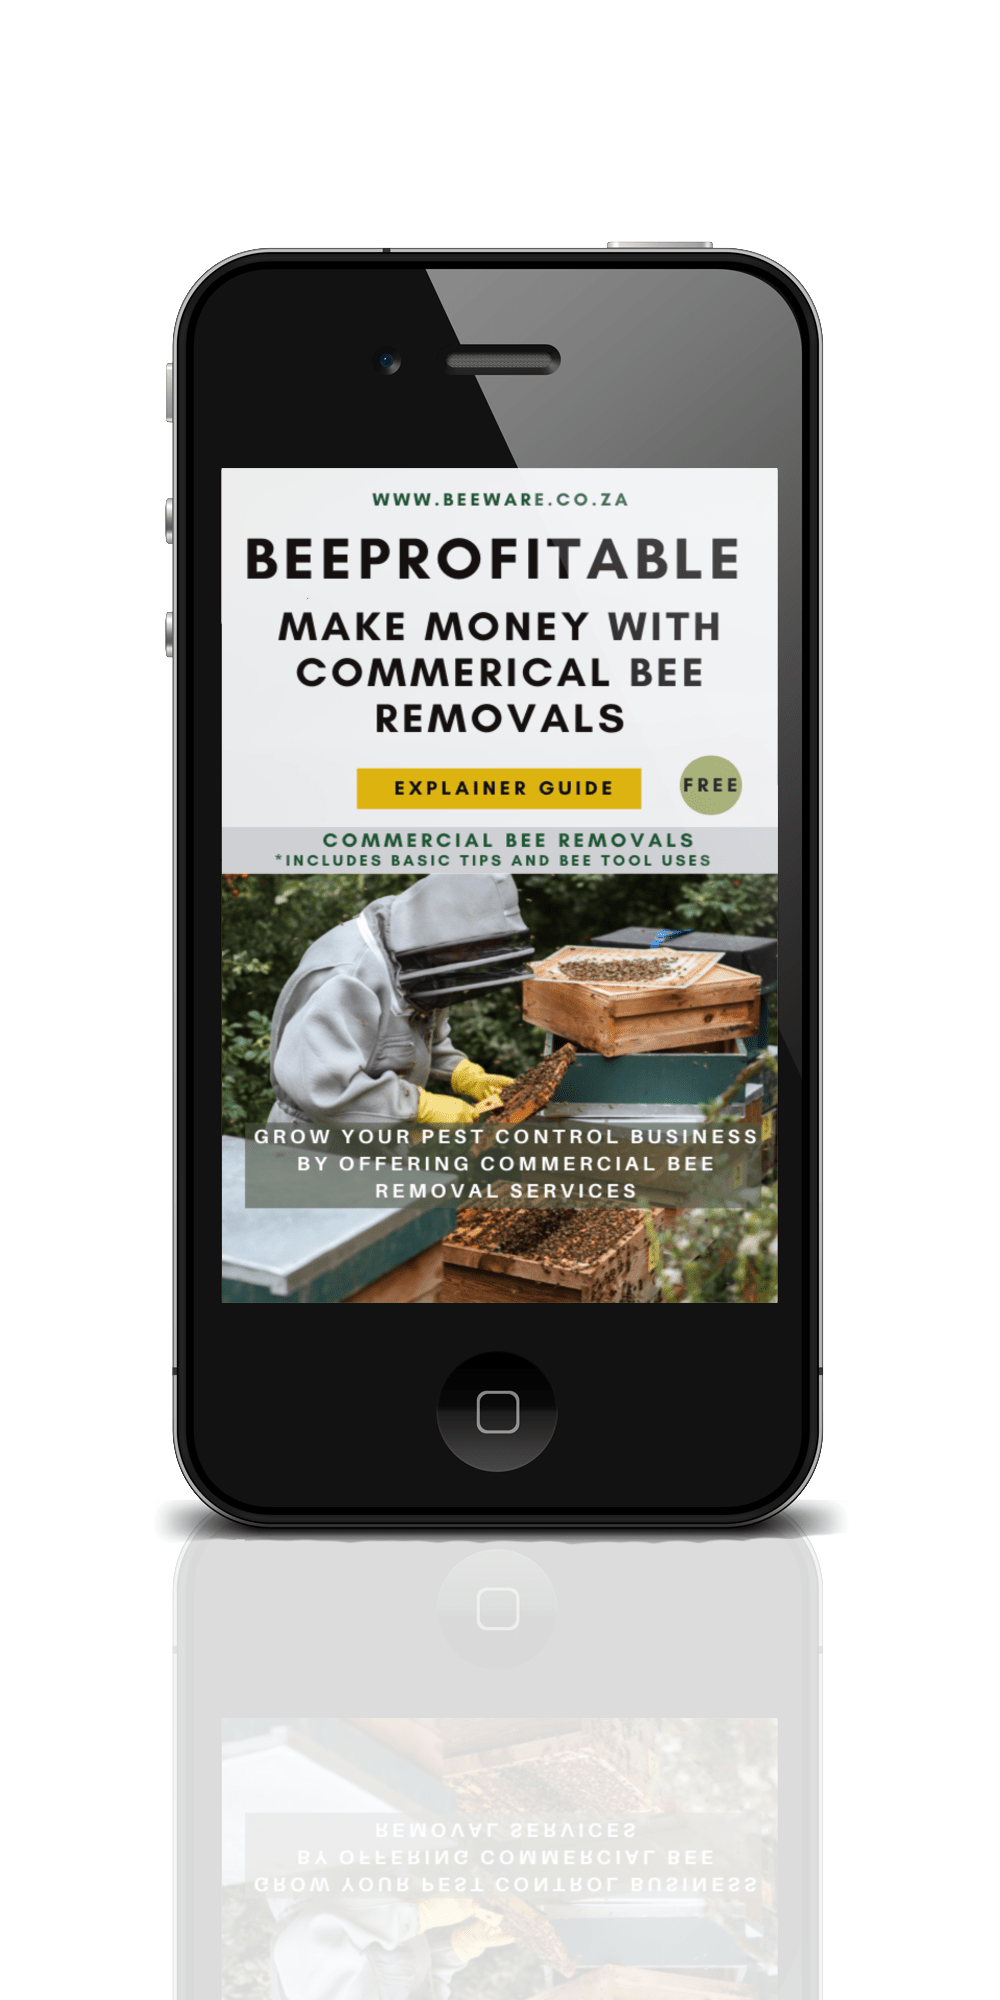 BeeProfitable - Make Money With Bee Removals